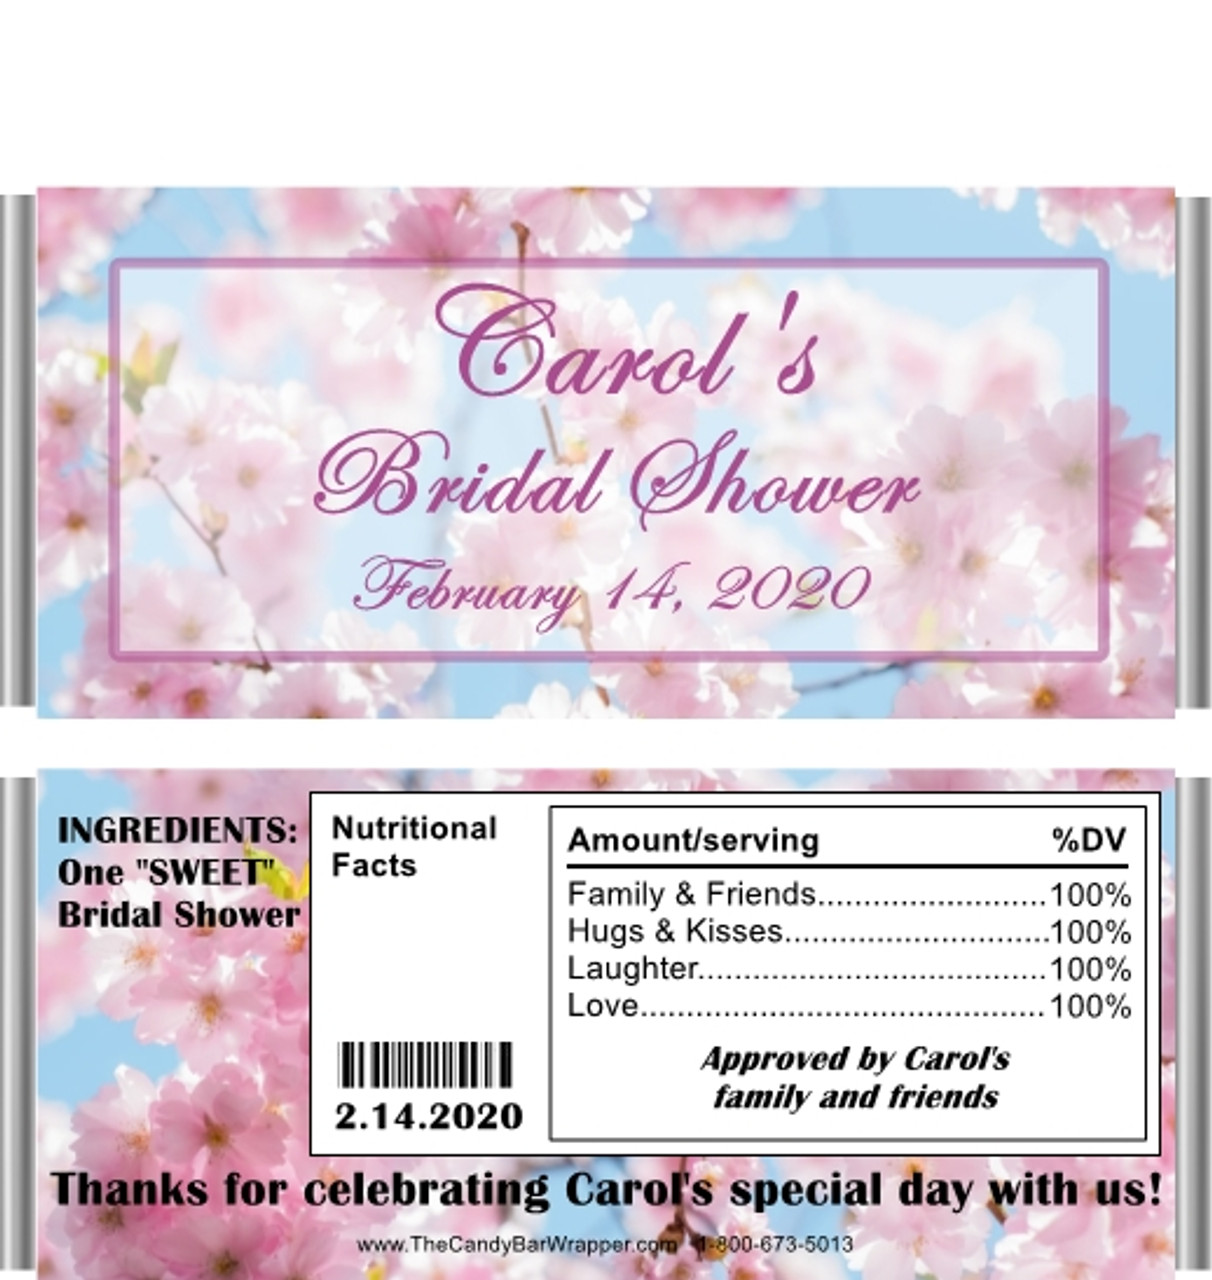 https://cdn11.bigcommerce.com/s-8bfcbt/images/stencil/1280x1280/products/2111/4315/Cherry_Blossom_Bridal_Shower_candy_wrappers_w_NL__95592.1587939869.jpg?c=2?imbypass=on